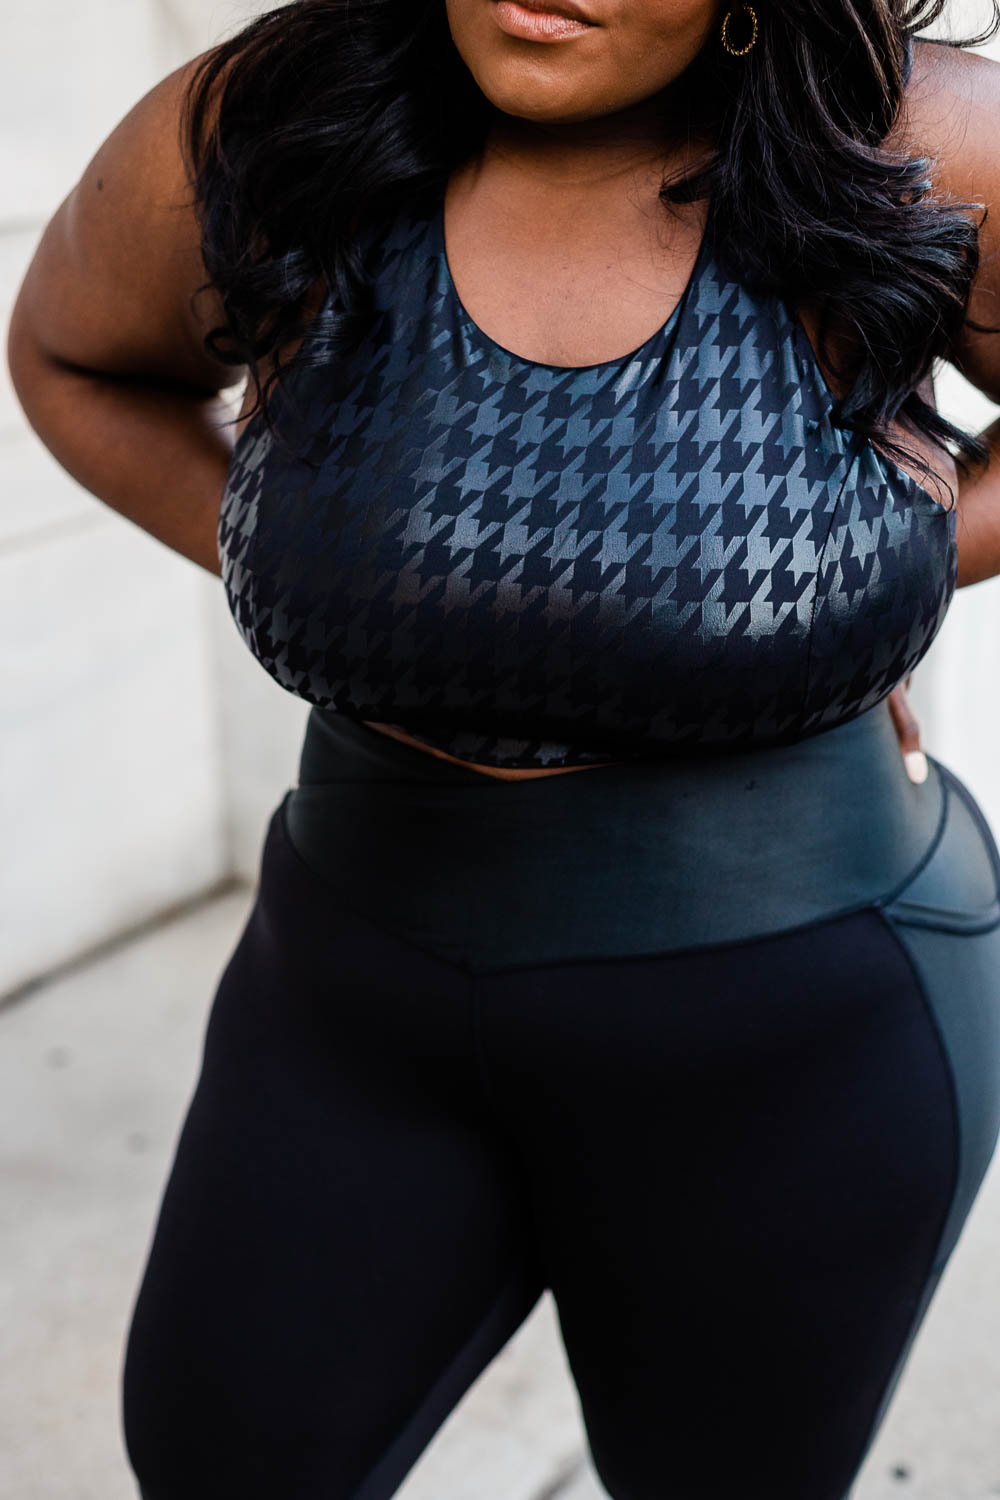 JCPenney, Xersion, Plus Size Athleticwear, Plus Size Fitness, Fitness